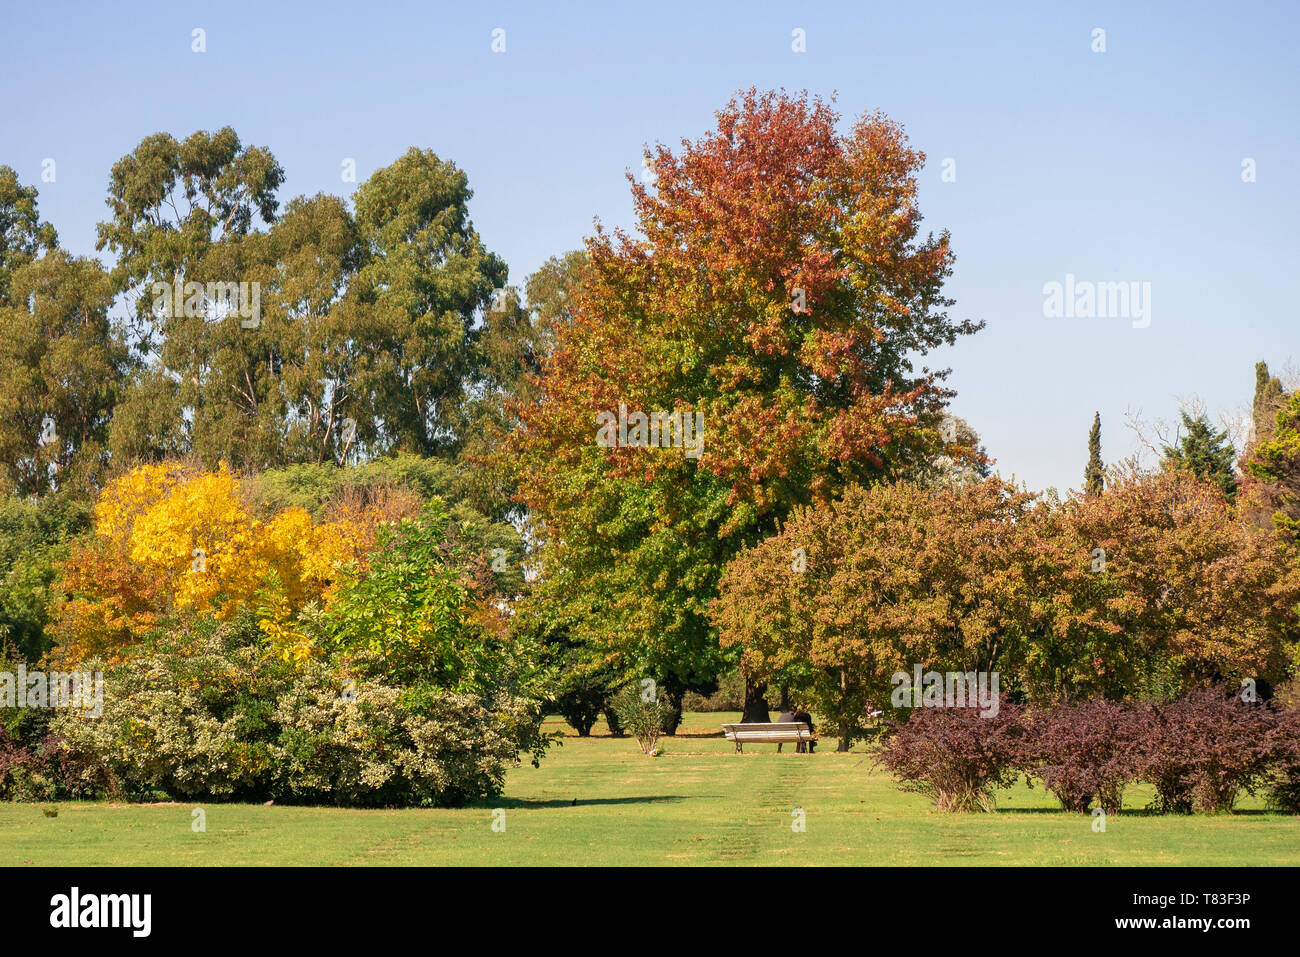 The colors and luminosity of autumn take over this rural image in the suburbs city of Buenos Aires, Argentina. Stock Photo